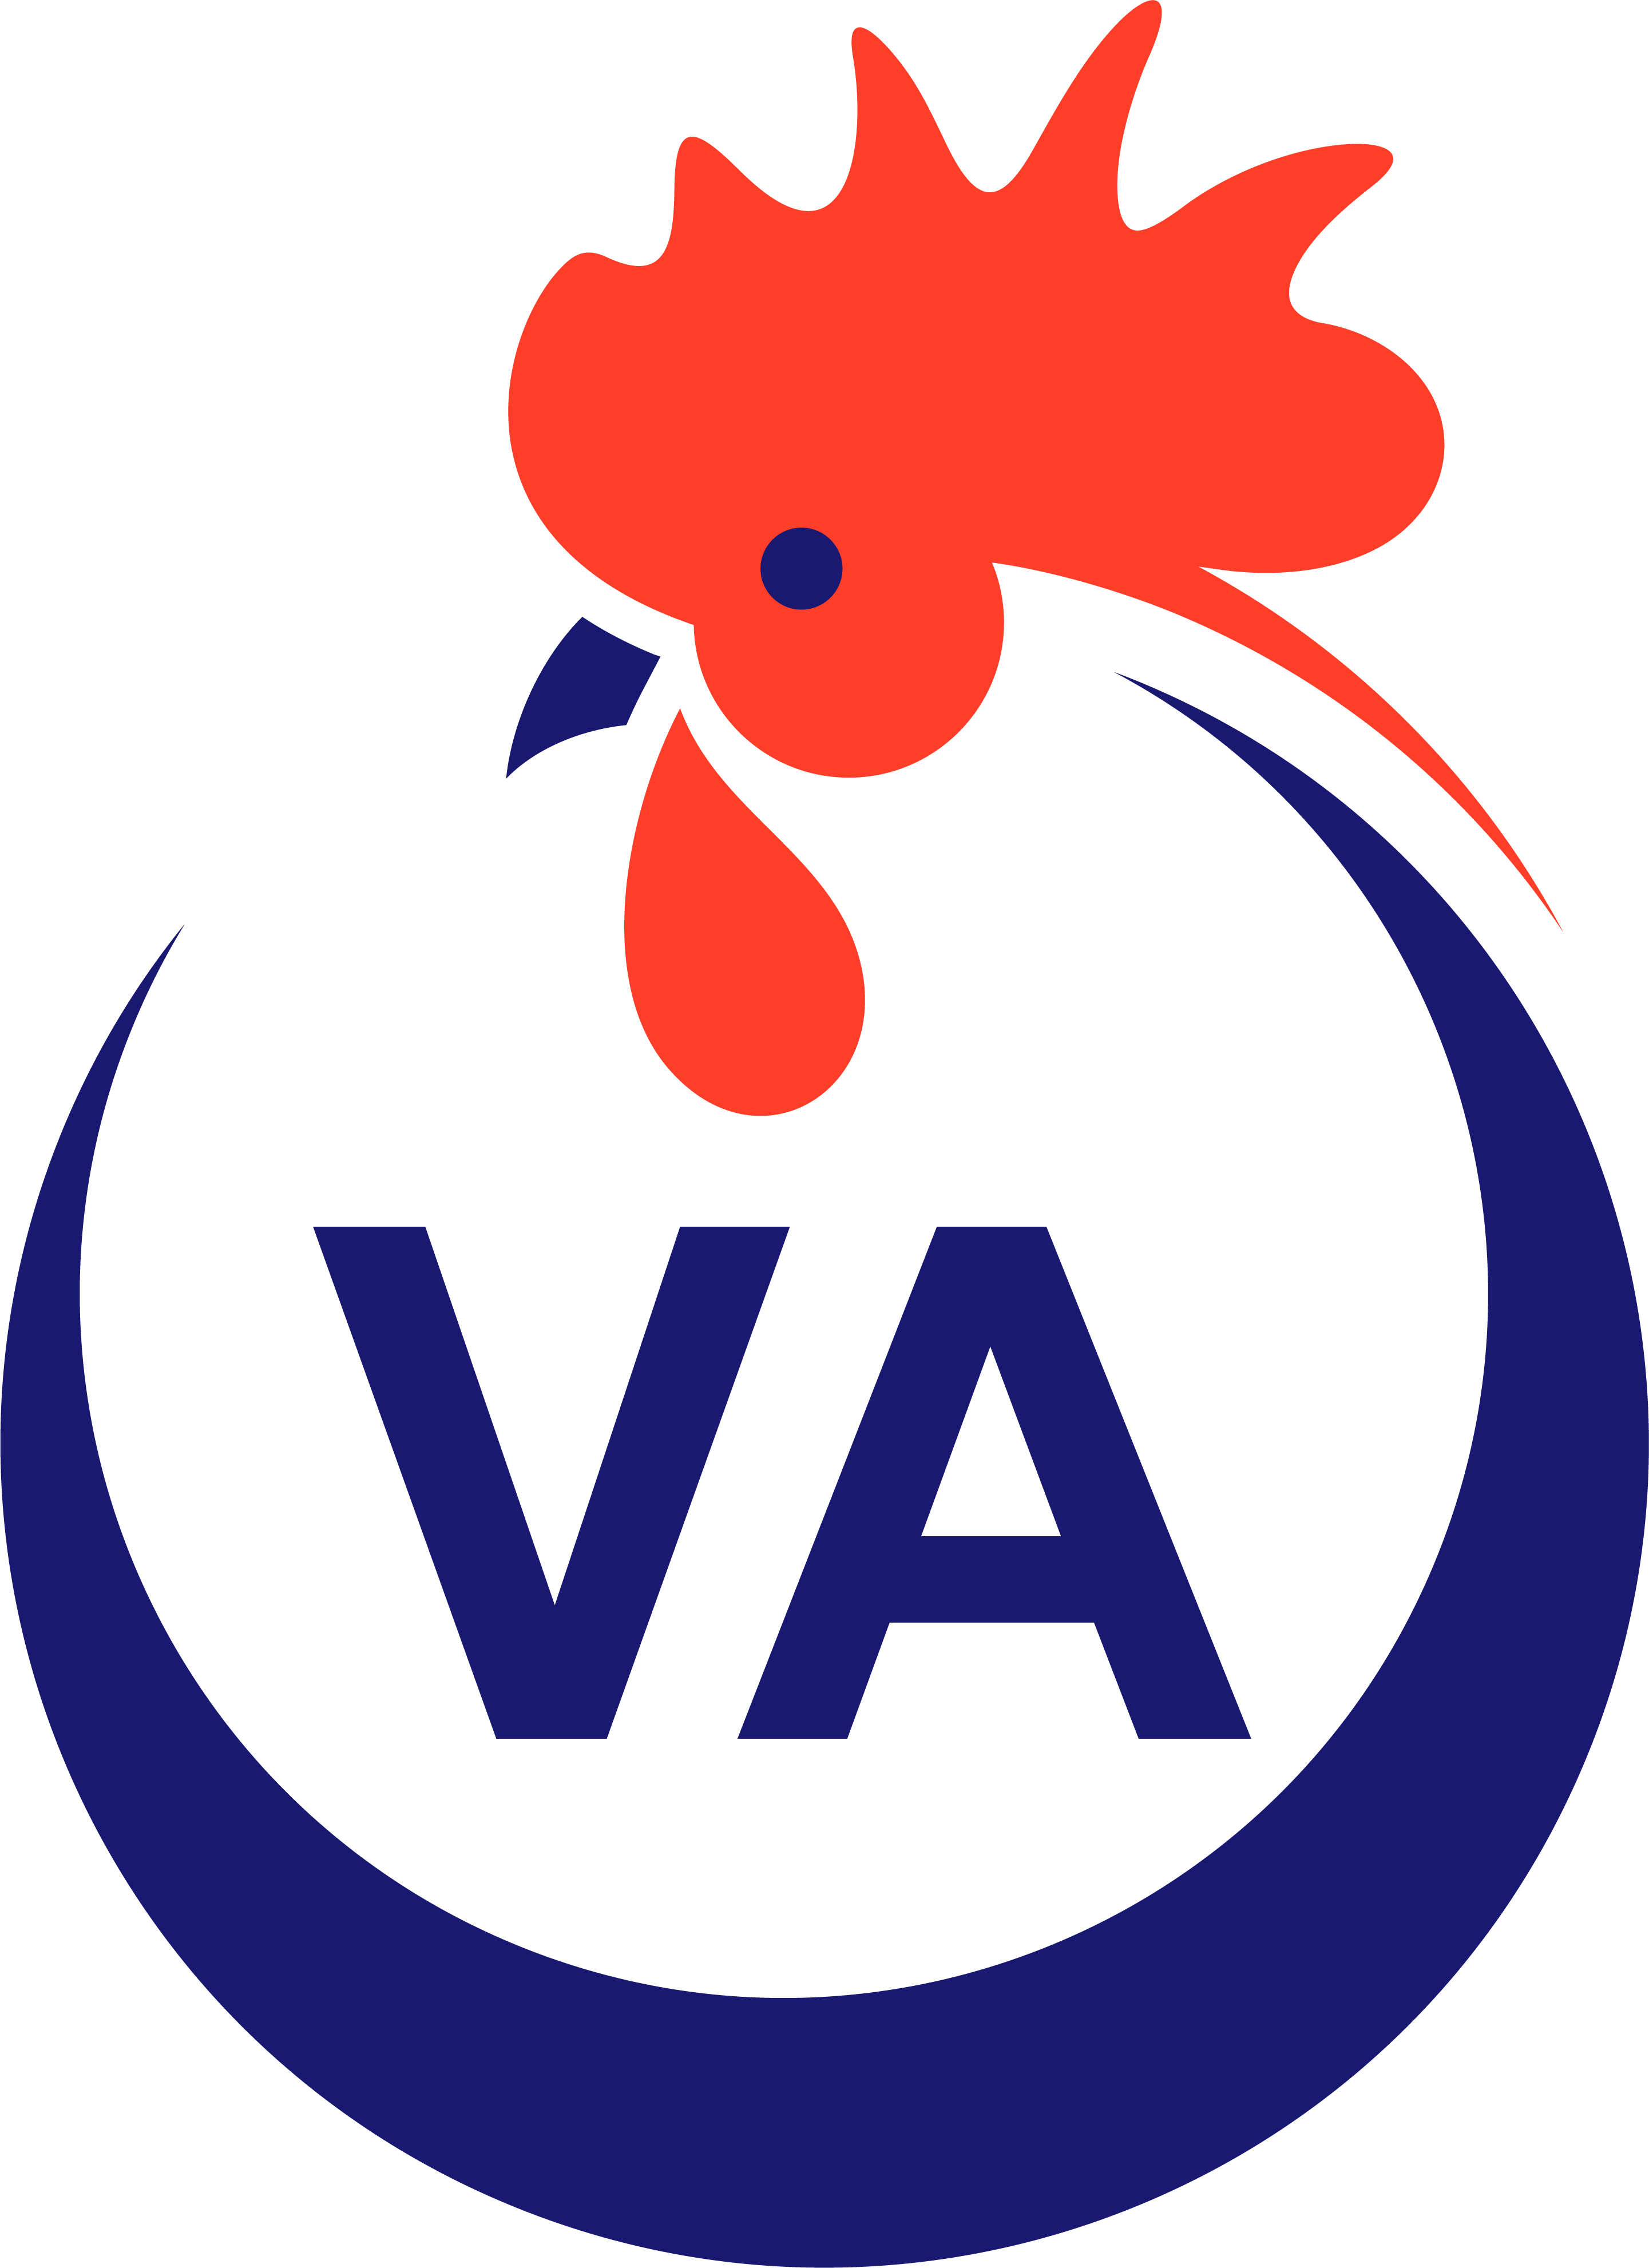 Virginia rooster icon